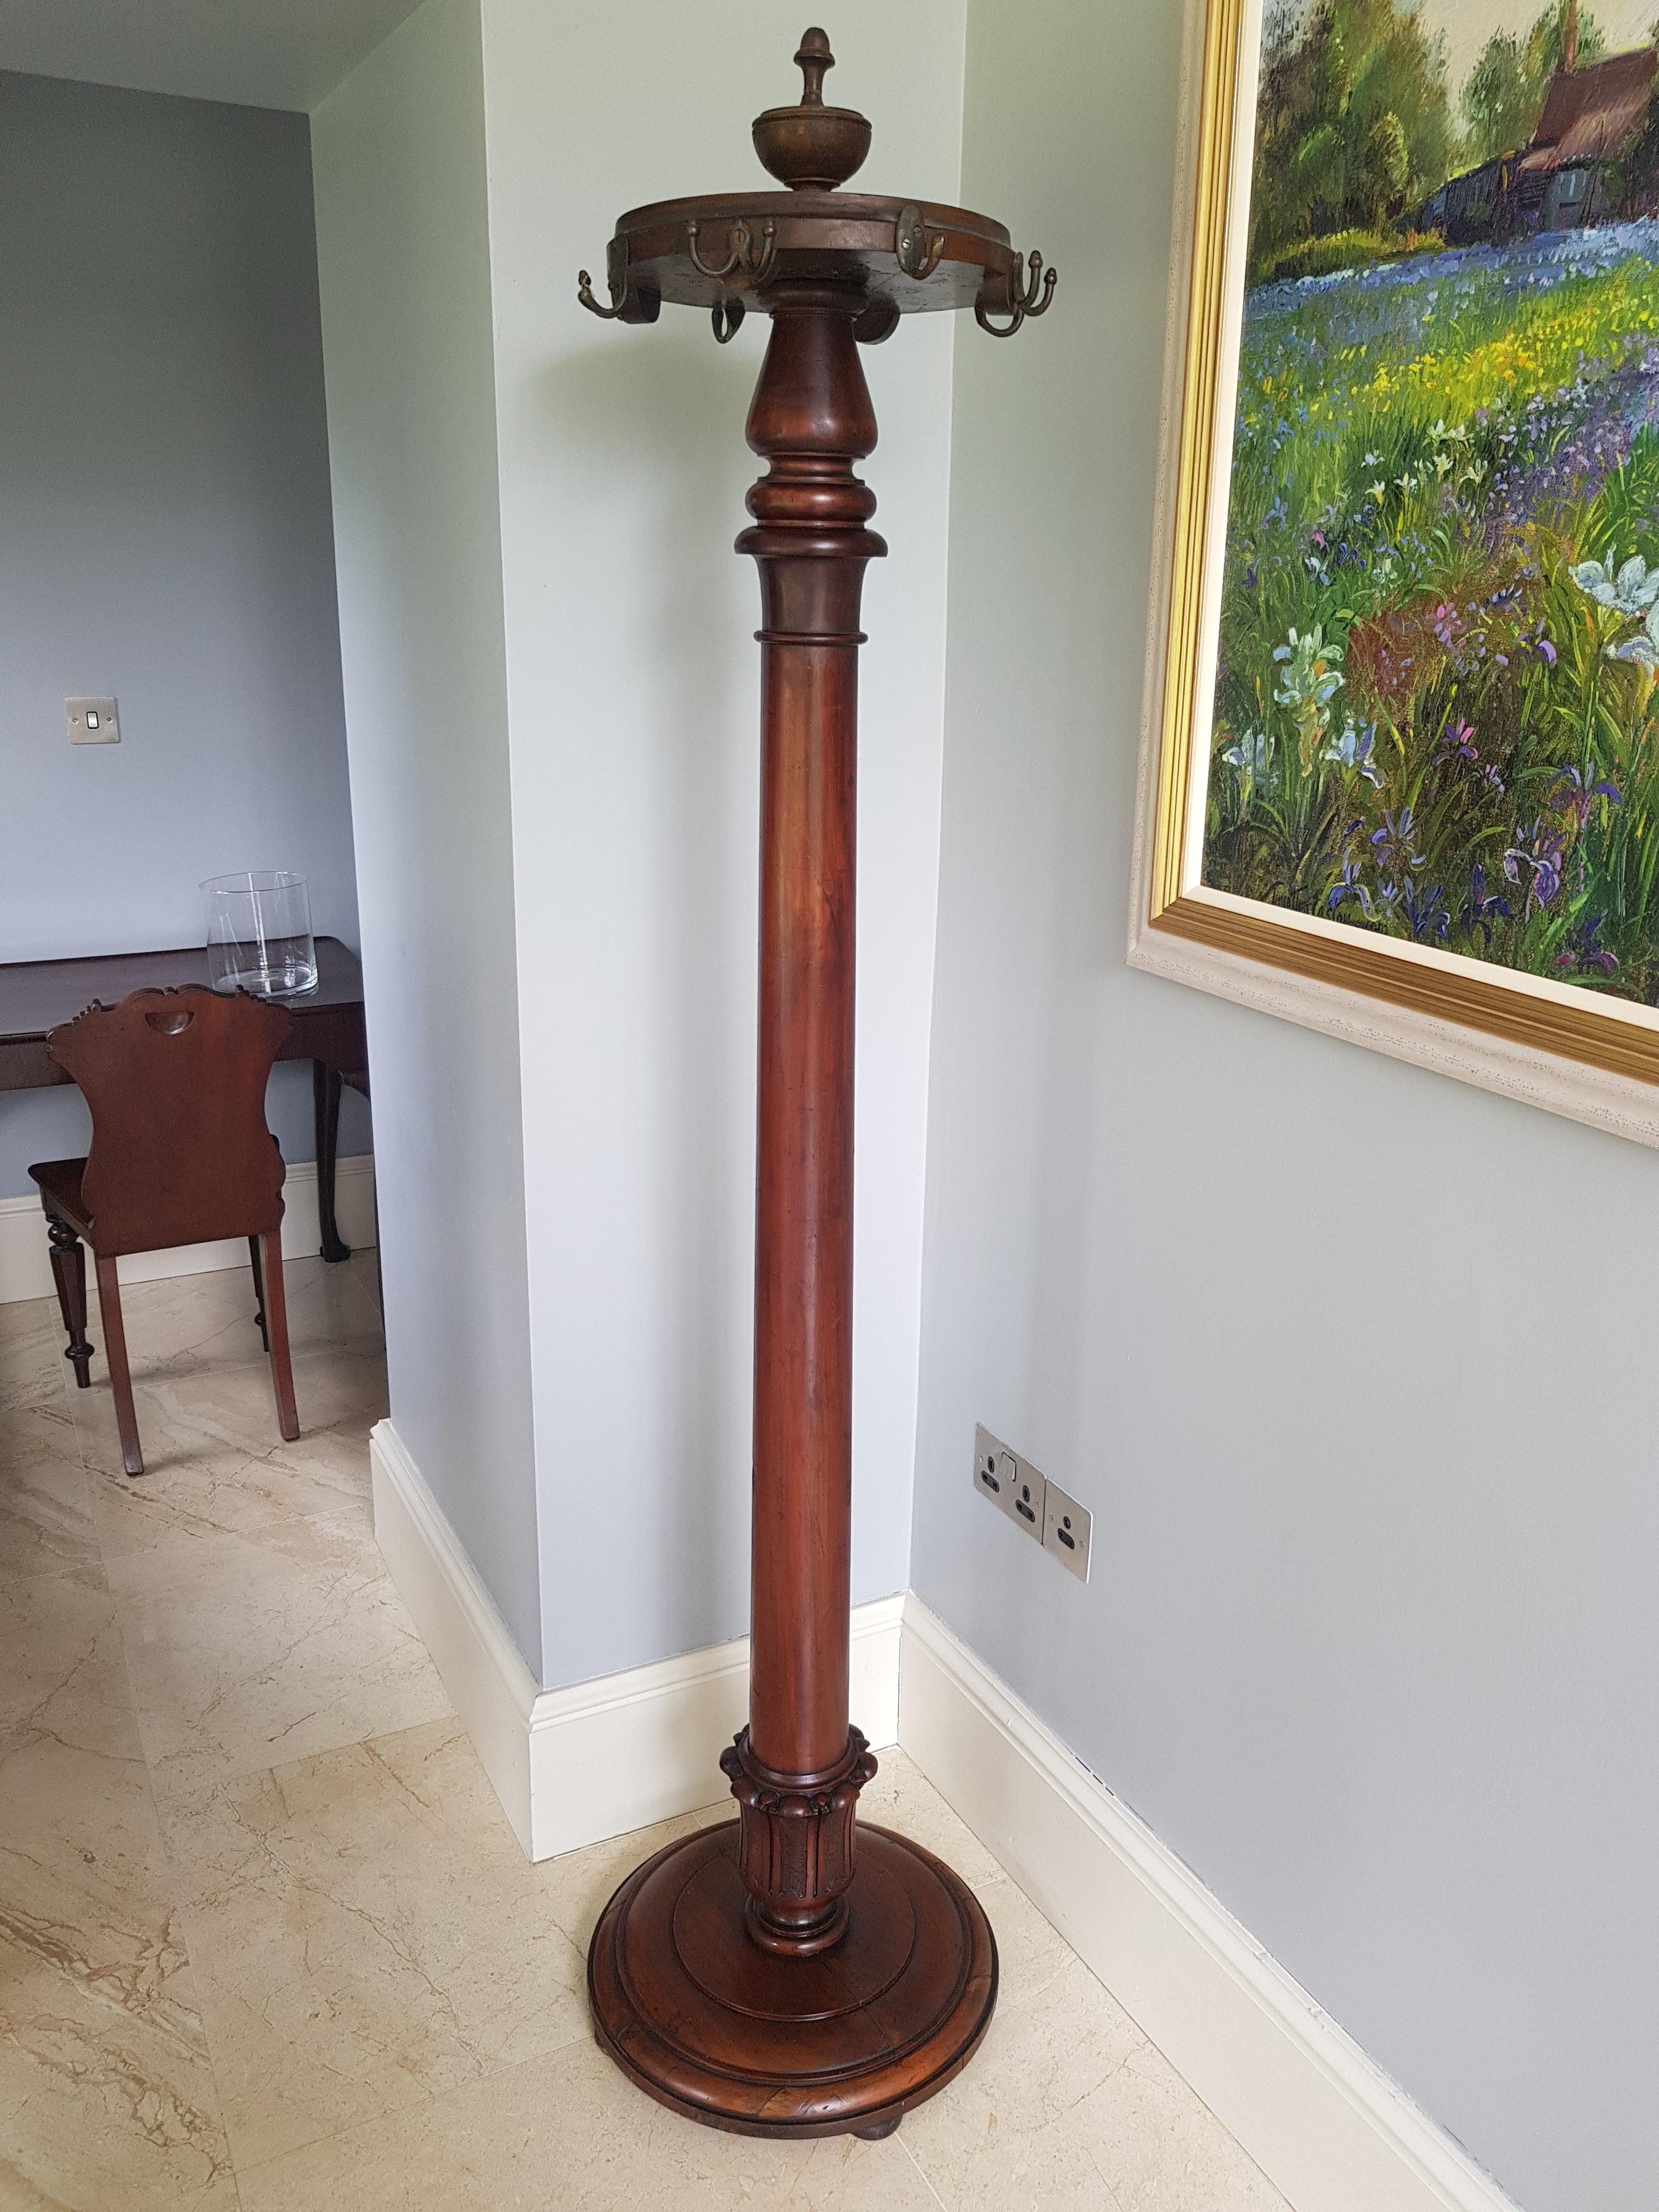 An Irish early 19th century tall mahogany coat rack with bronze hooks, featuring a central cylindrical mahogany column terminating on a round base.

Constructed very much in the style of early Irish 19th century furniture by Mack, Williams and